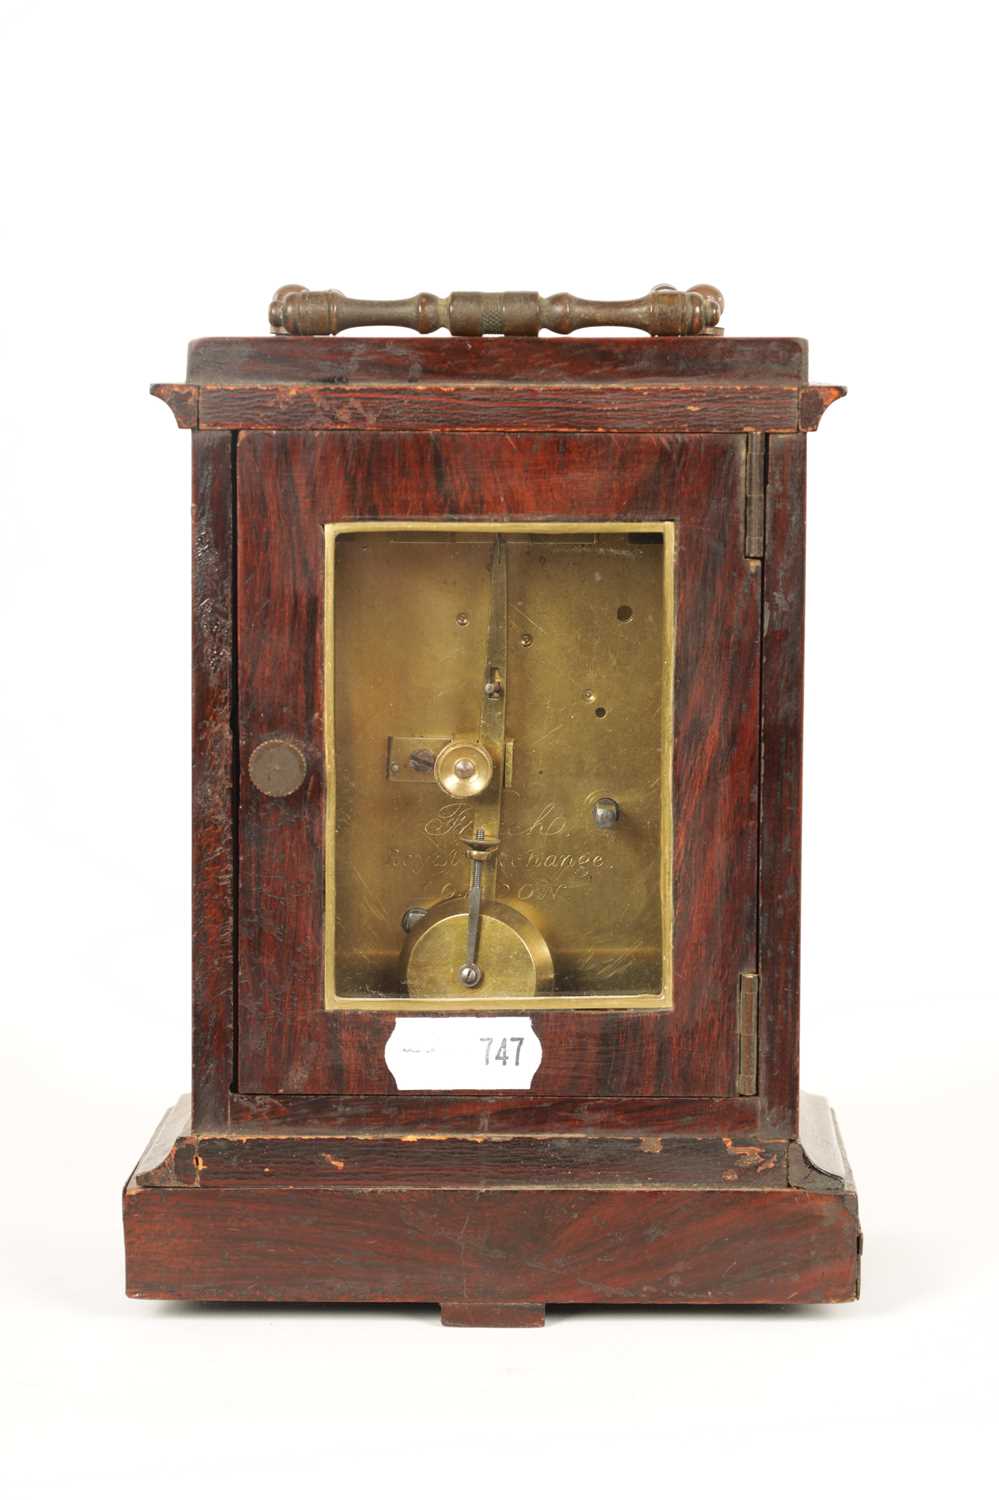 FRENCH, ROYAL EXCHANGE, LONDON. A SMALL CARRIAGE STYLE ENGLISH FUSEE MANTEL CLOCK - Image 10 of 14